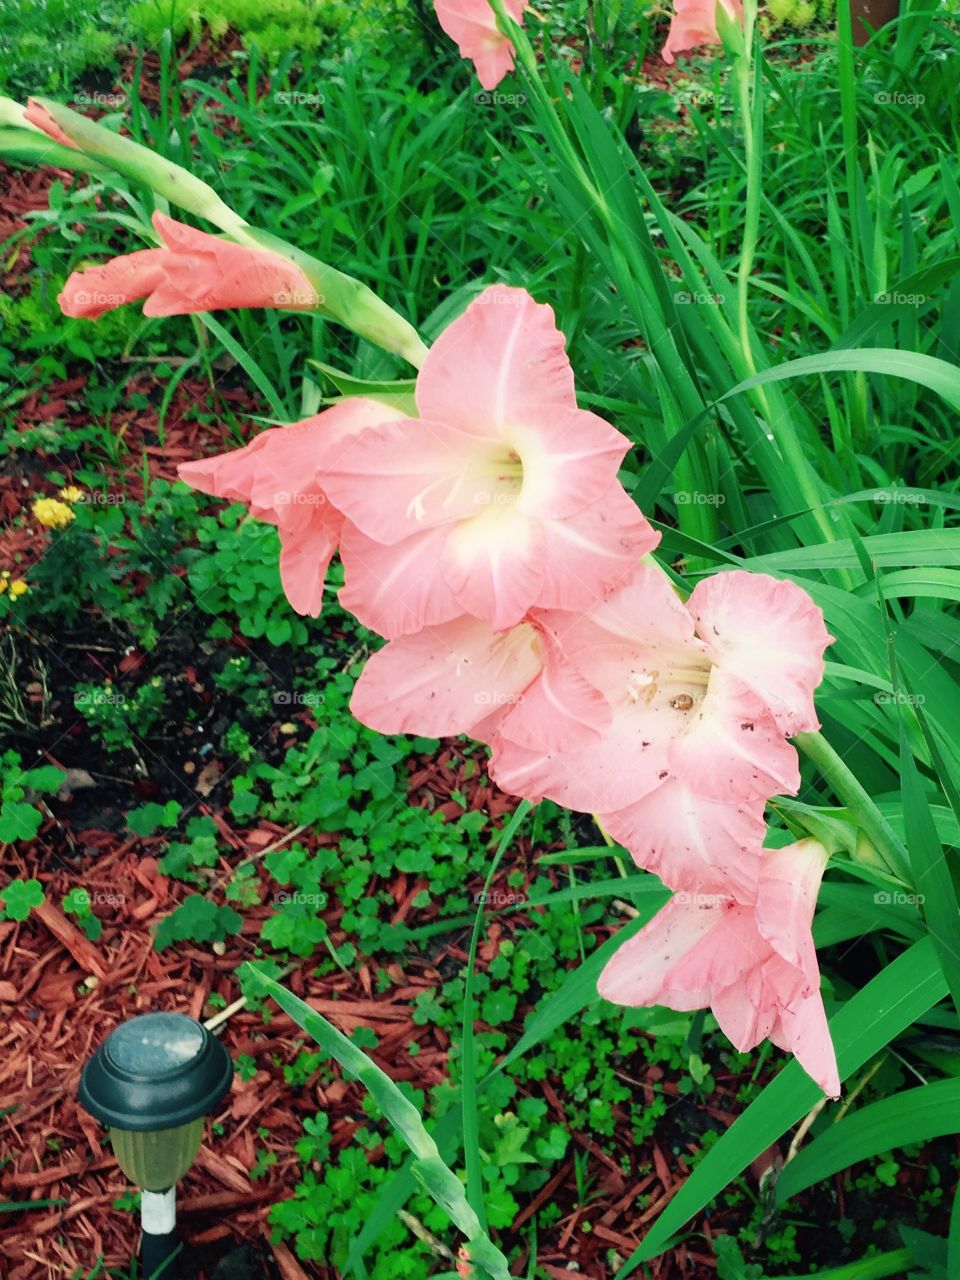 A issue of s pink coral gladiola flower in my garden.